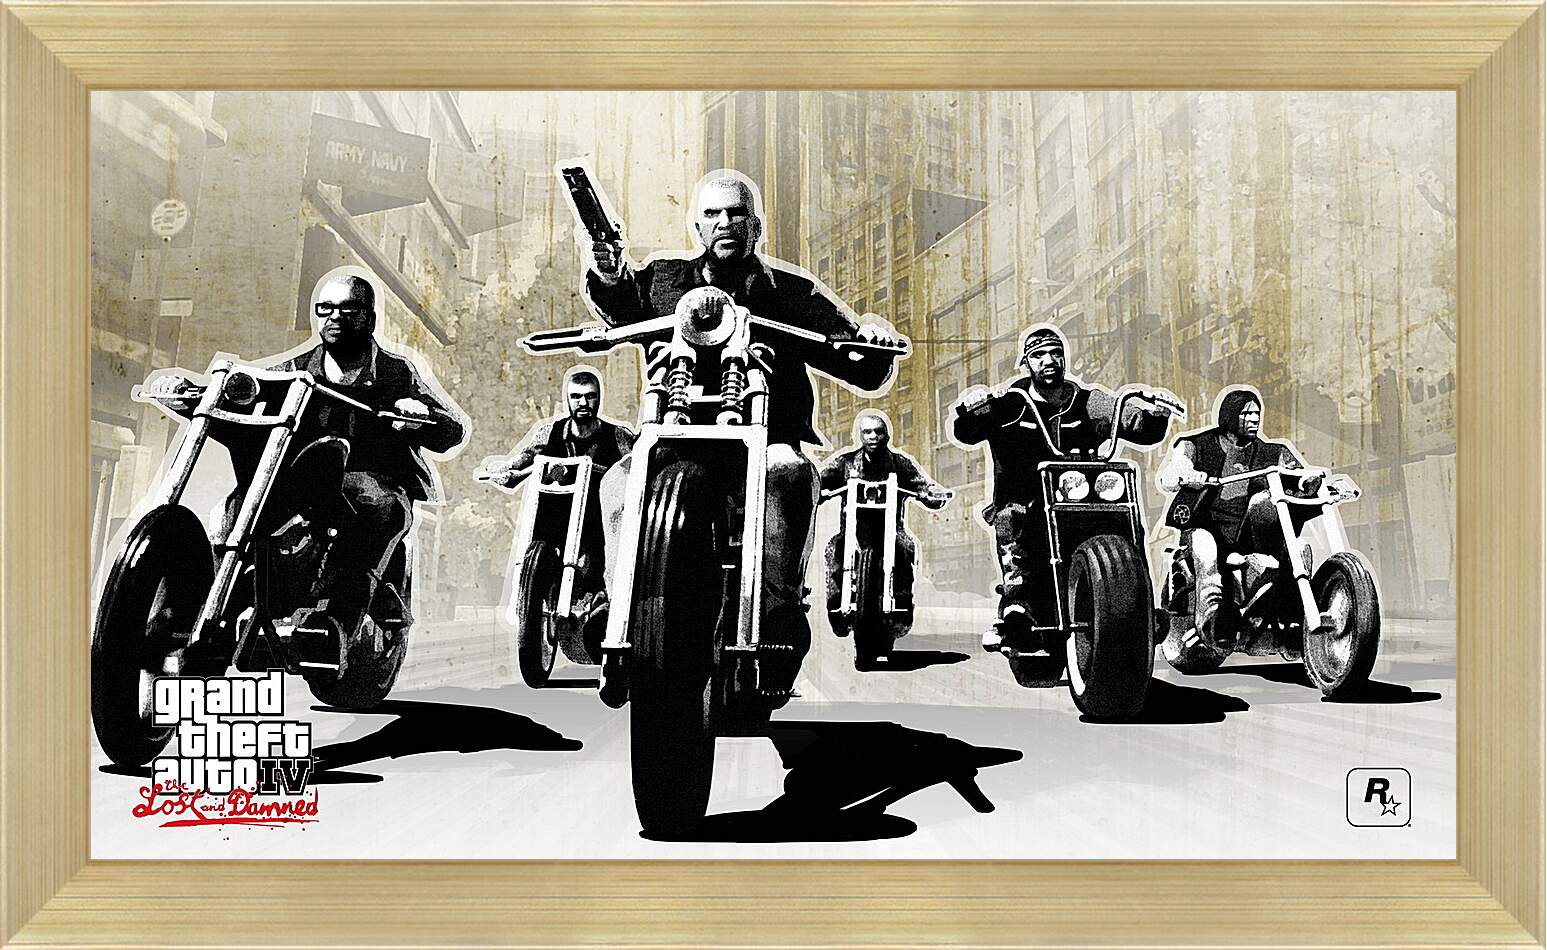 Картина в раме - gta 4 lost and damned, grand theft auto 4 lost and damned, bikers
